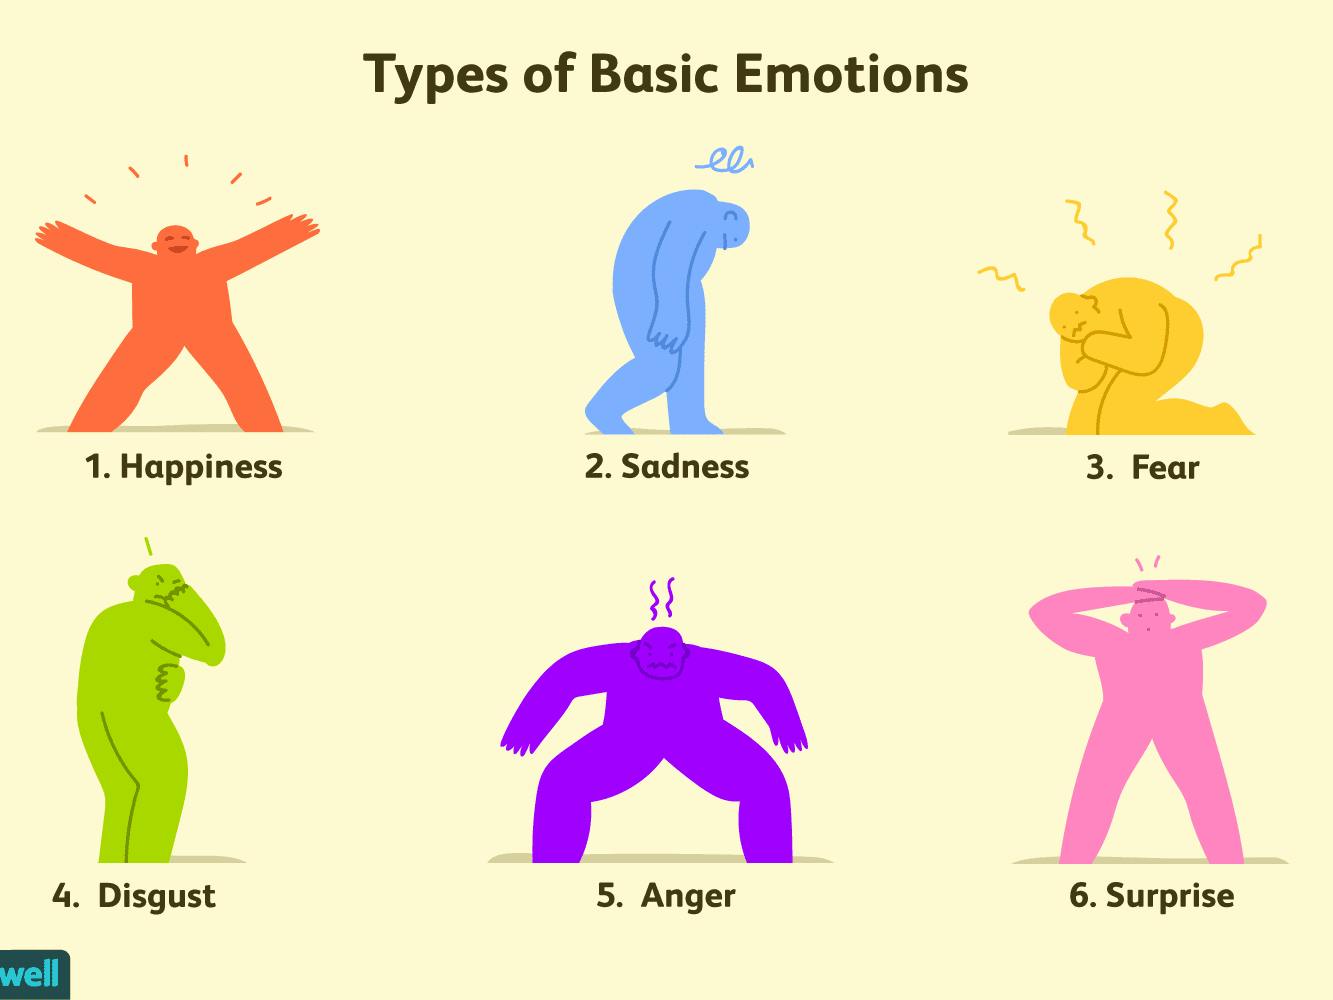 an-overview-of-the-types-of-emotions-4163976-01-474bb455cfe74c3cb98ea46113e3108b.png